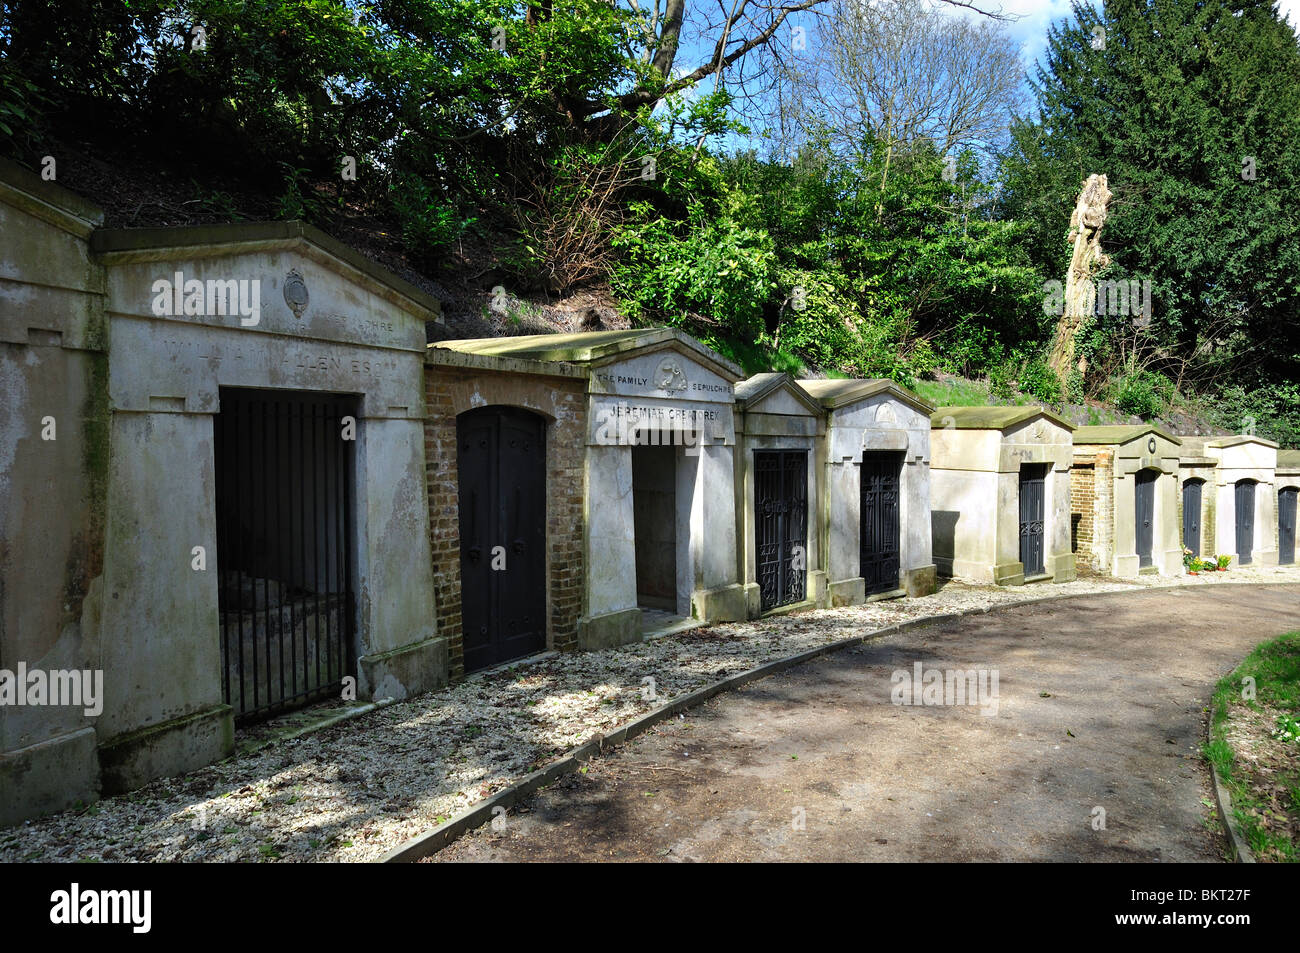 Family tombs in Highgate Cemetery West, London Stock Photo